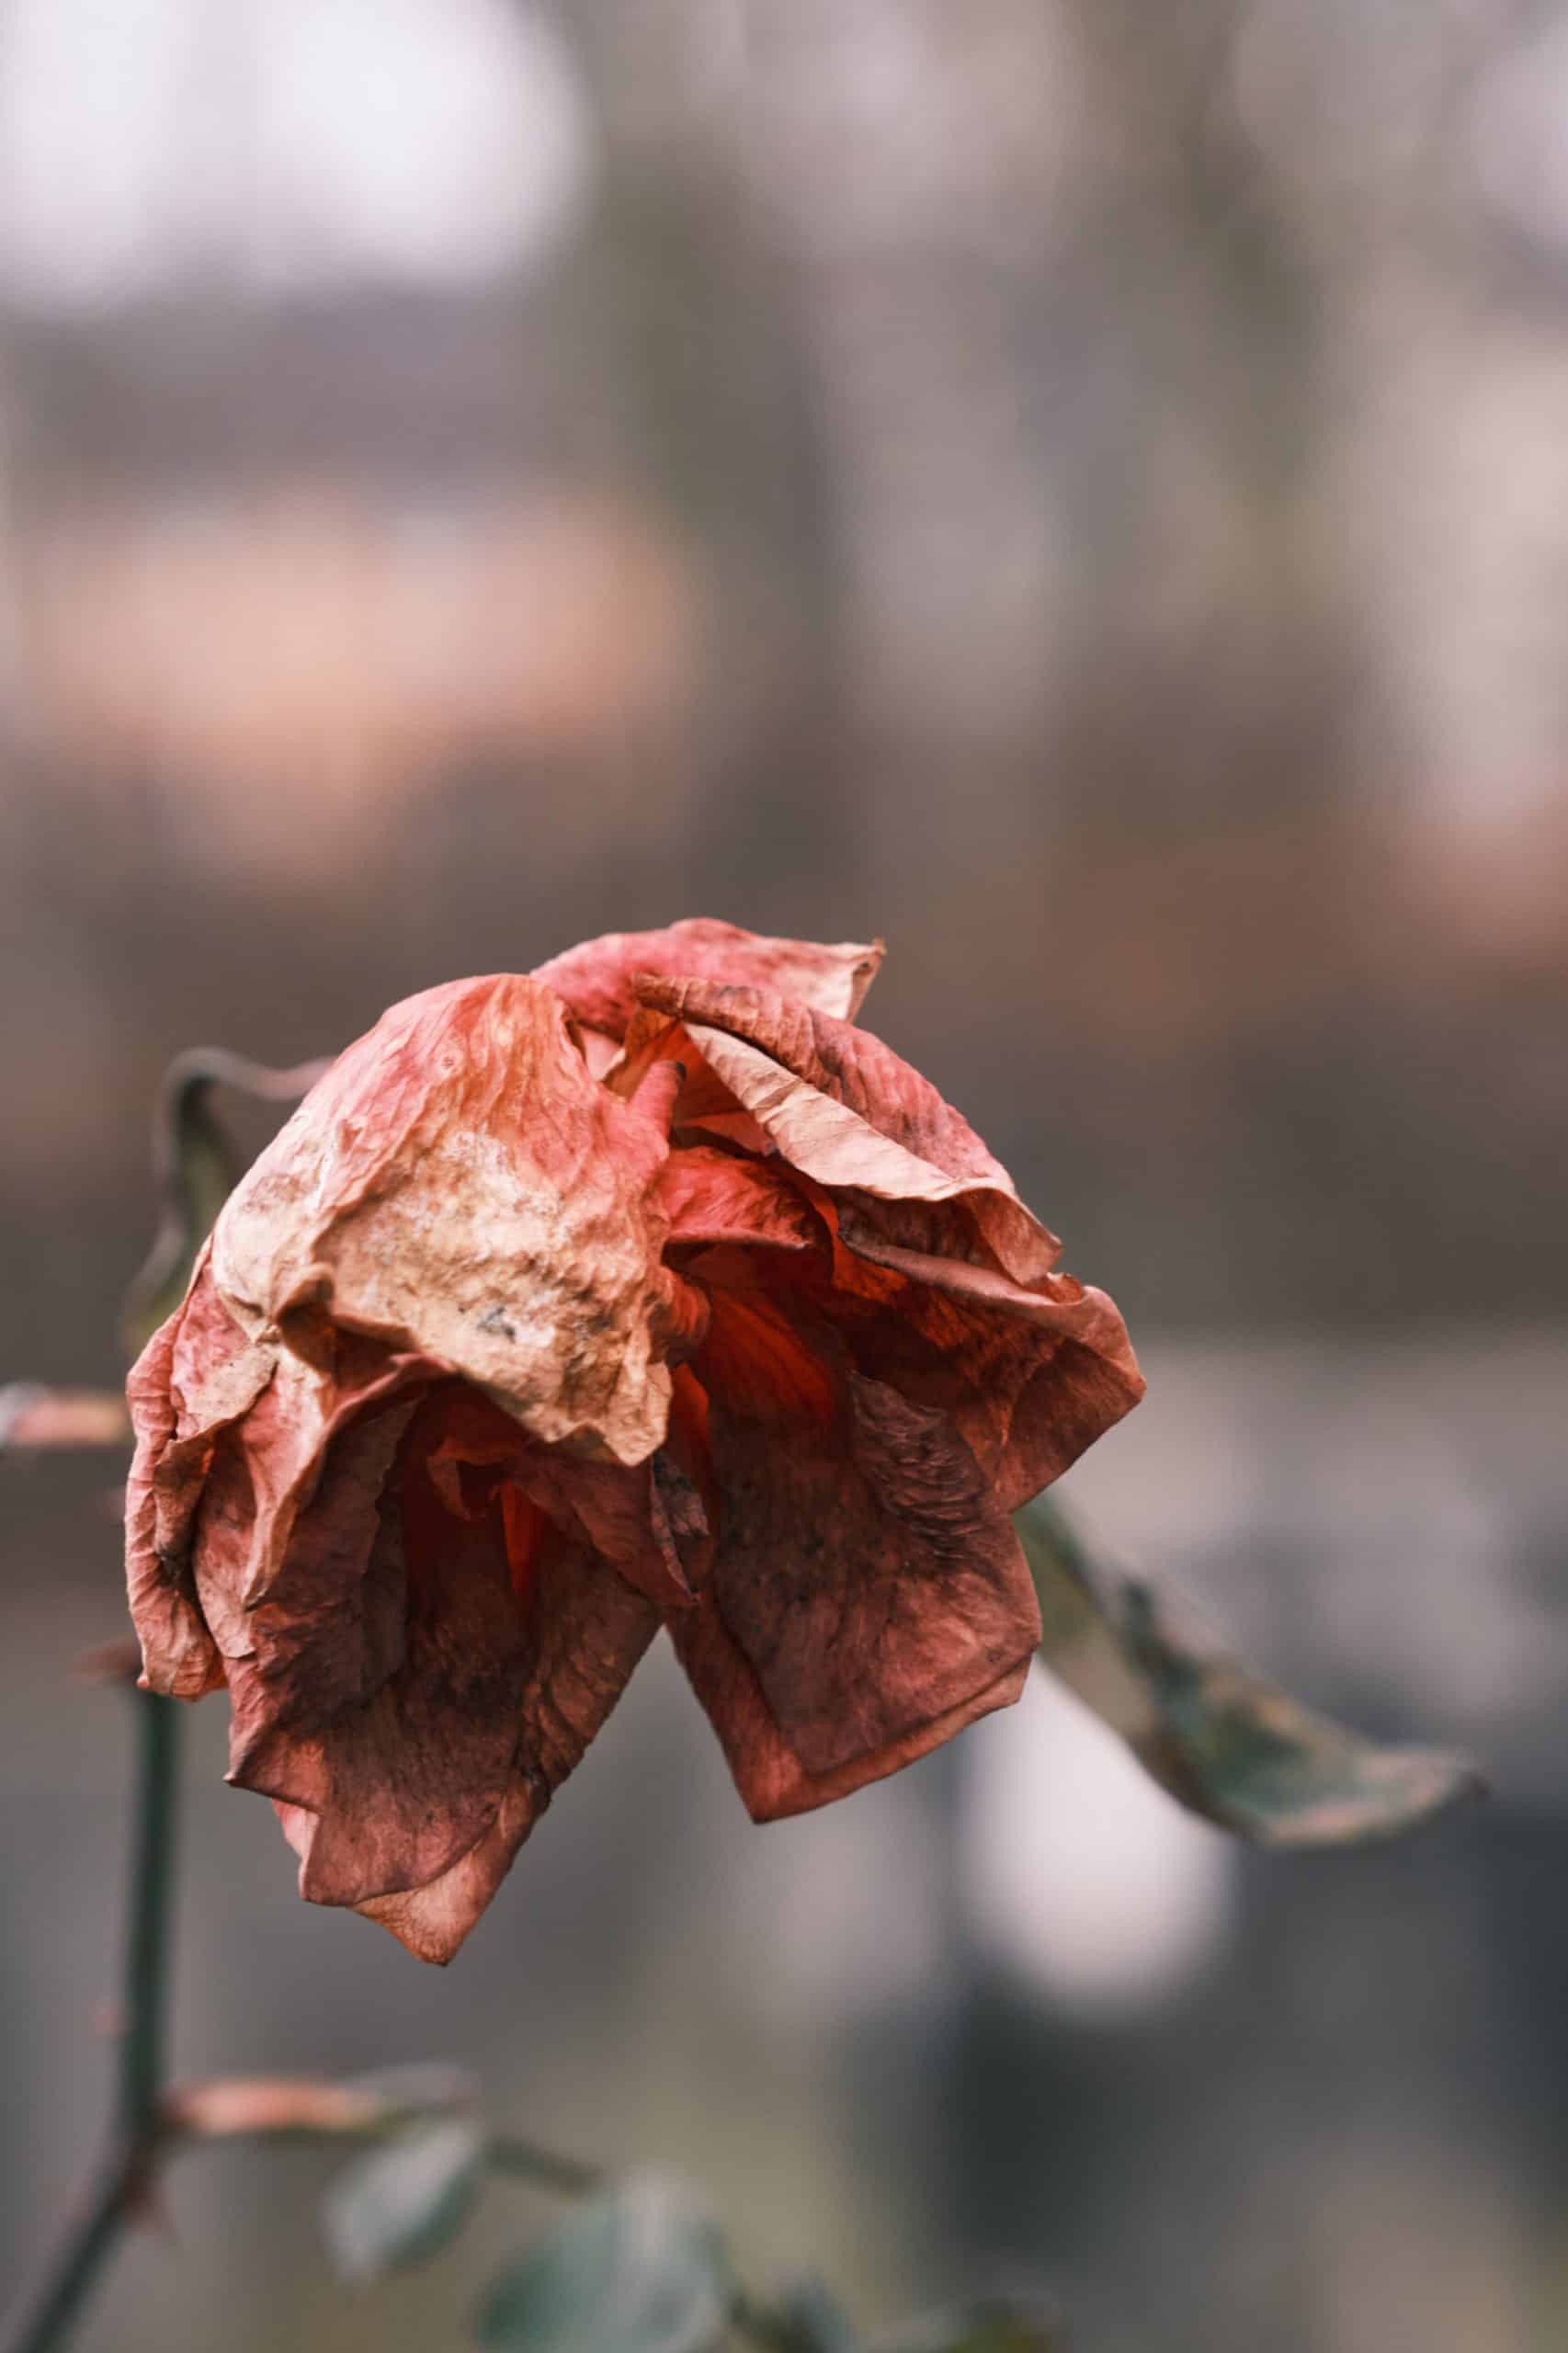 Dying Rose